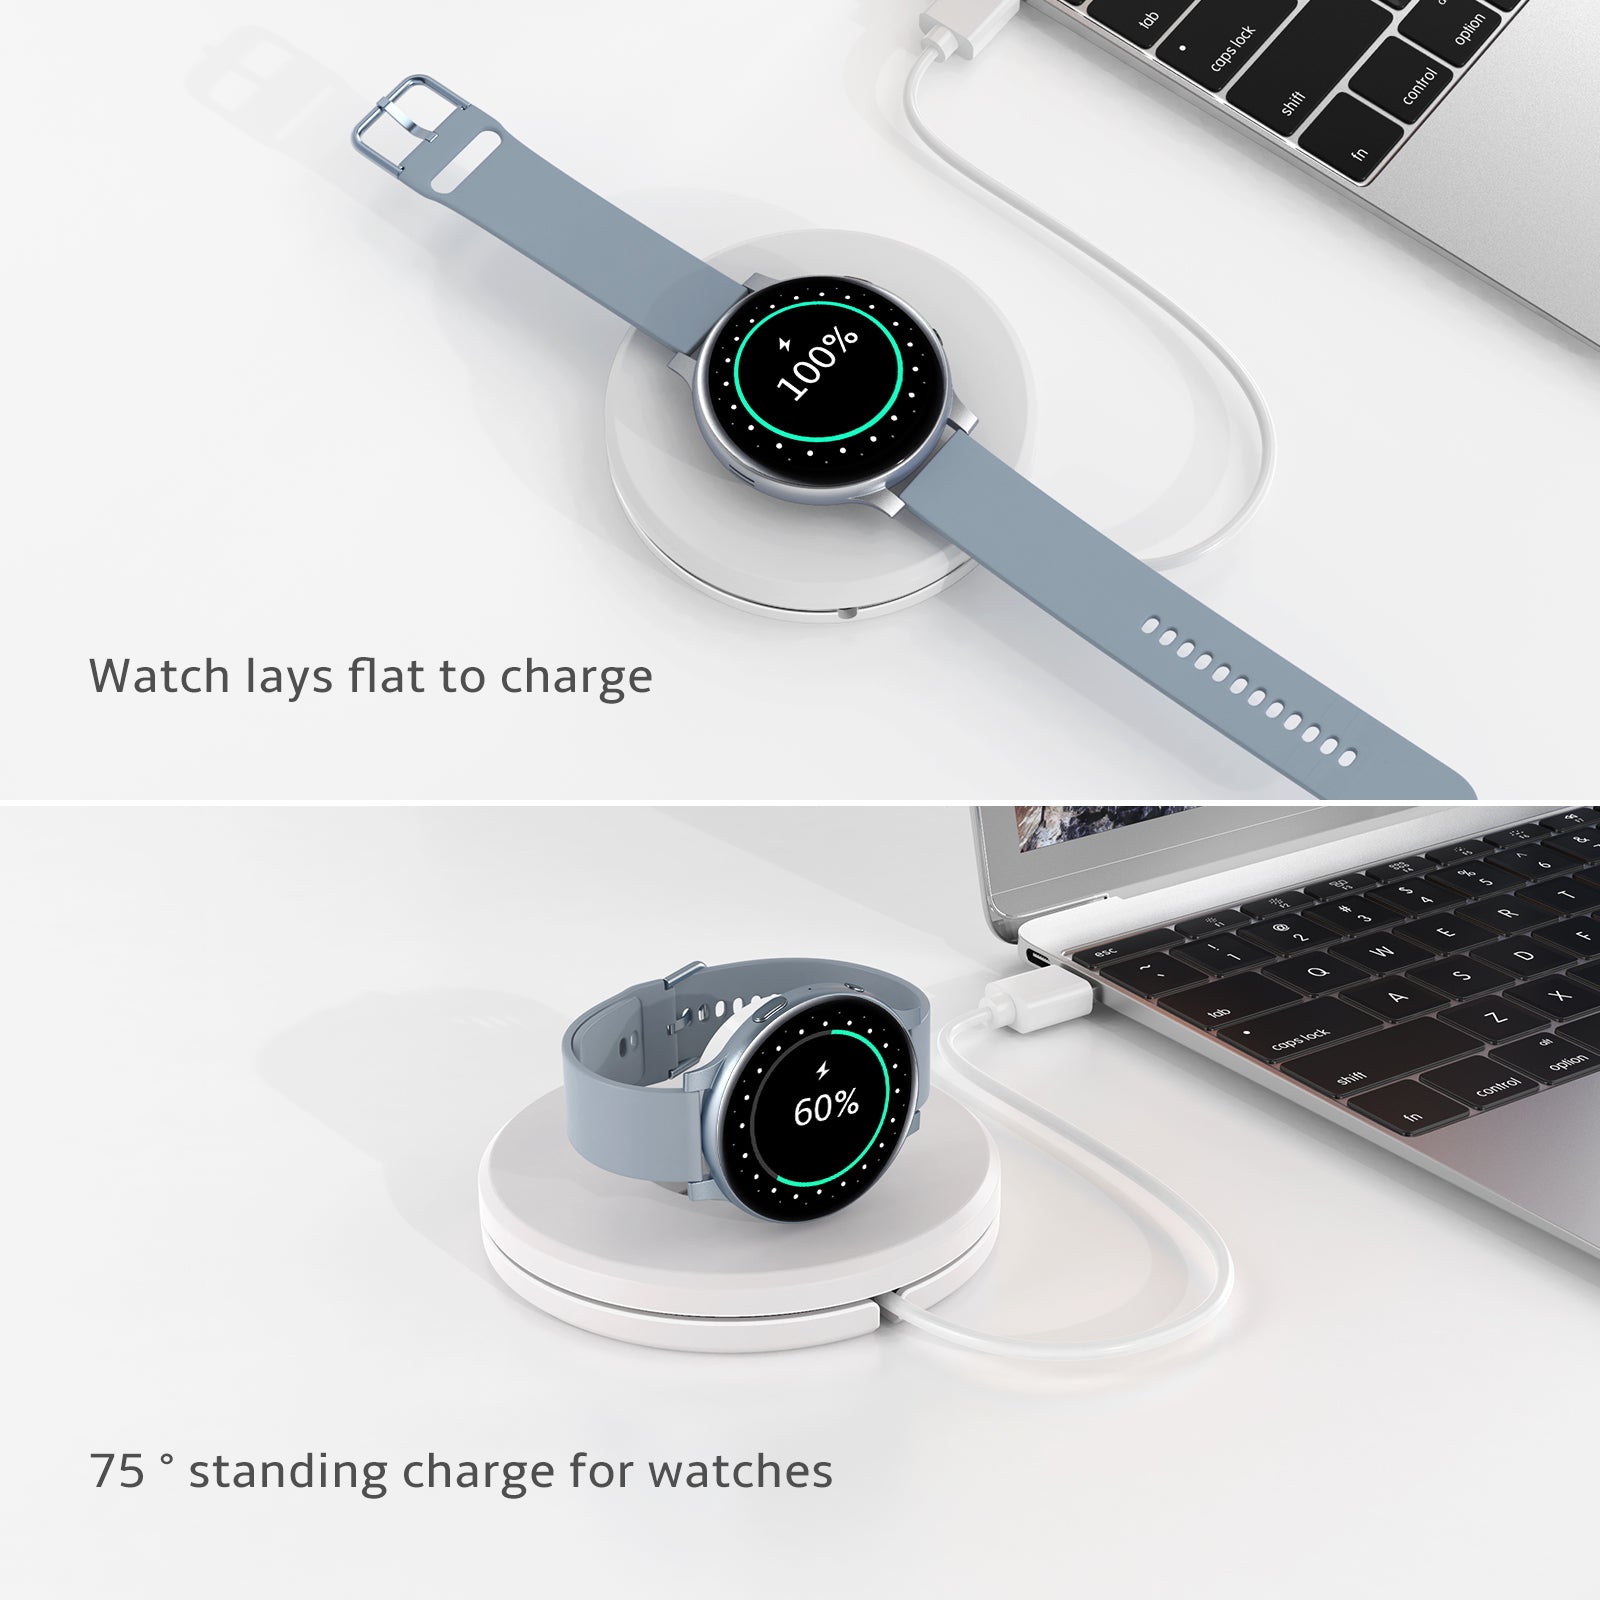 QS-03 Portable Folding Wireless Charger Cable Winder Stand Dock for Samsung Galaxy Watch Active/Active2/Watch3 - White